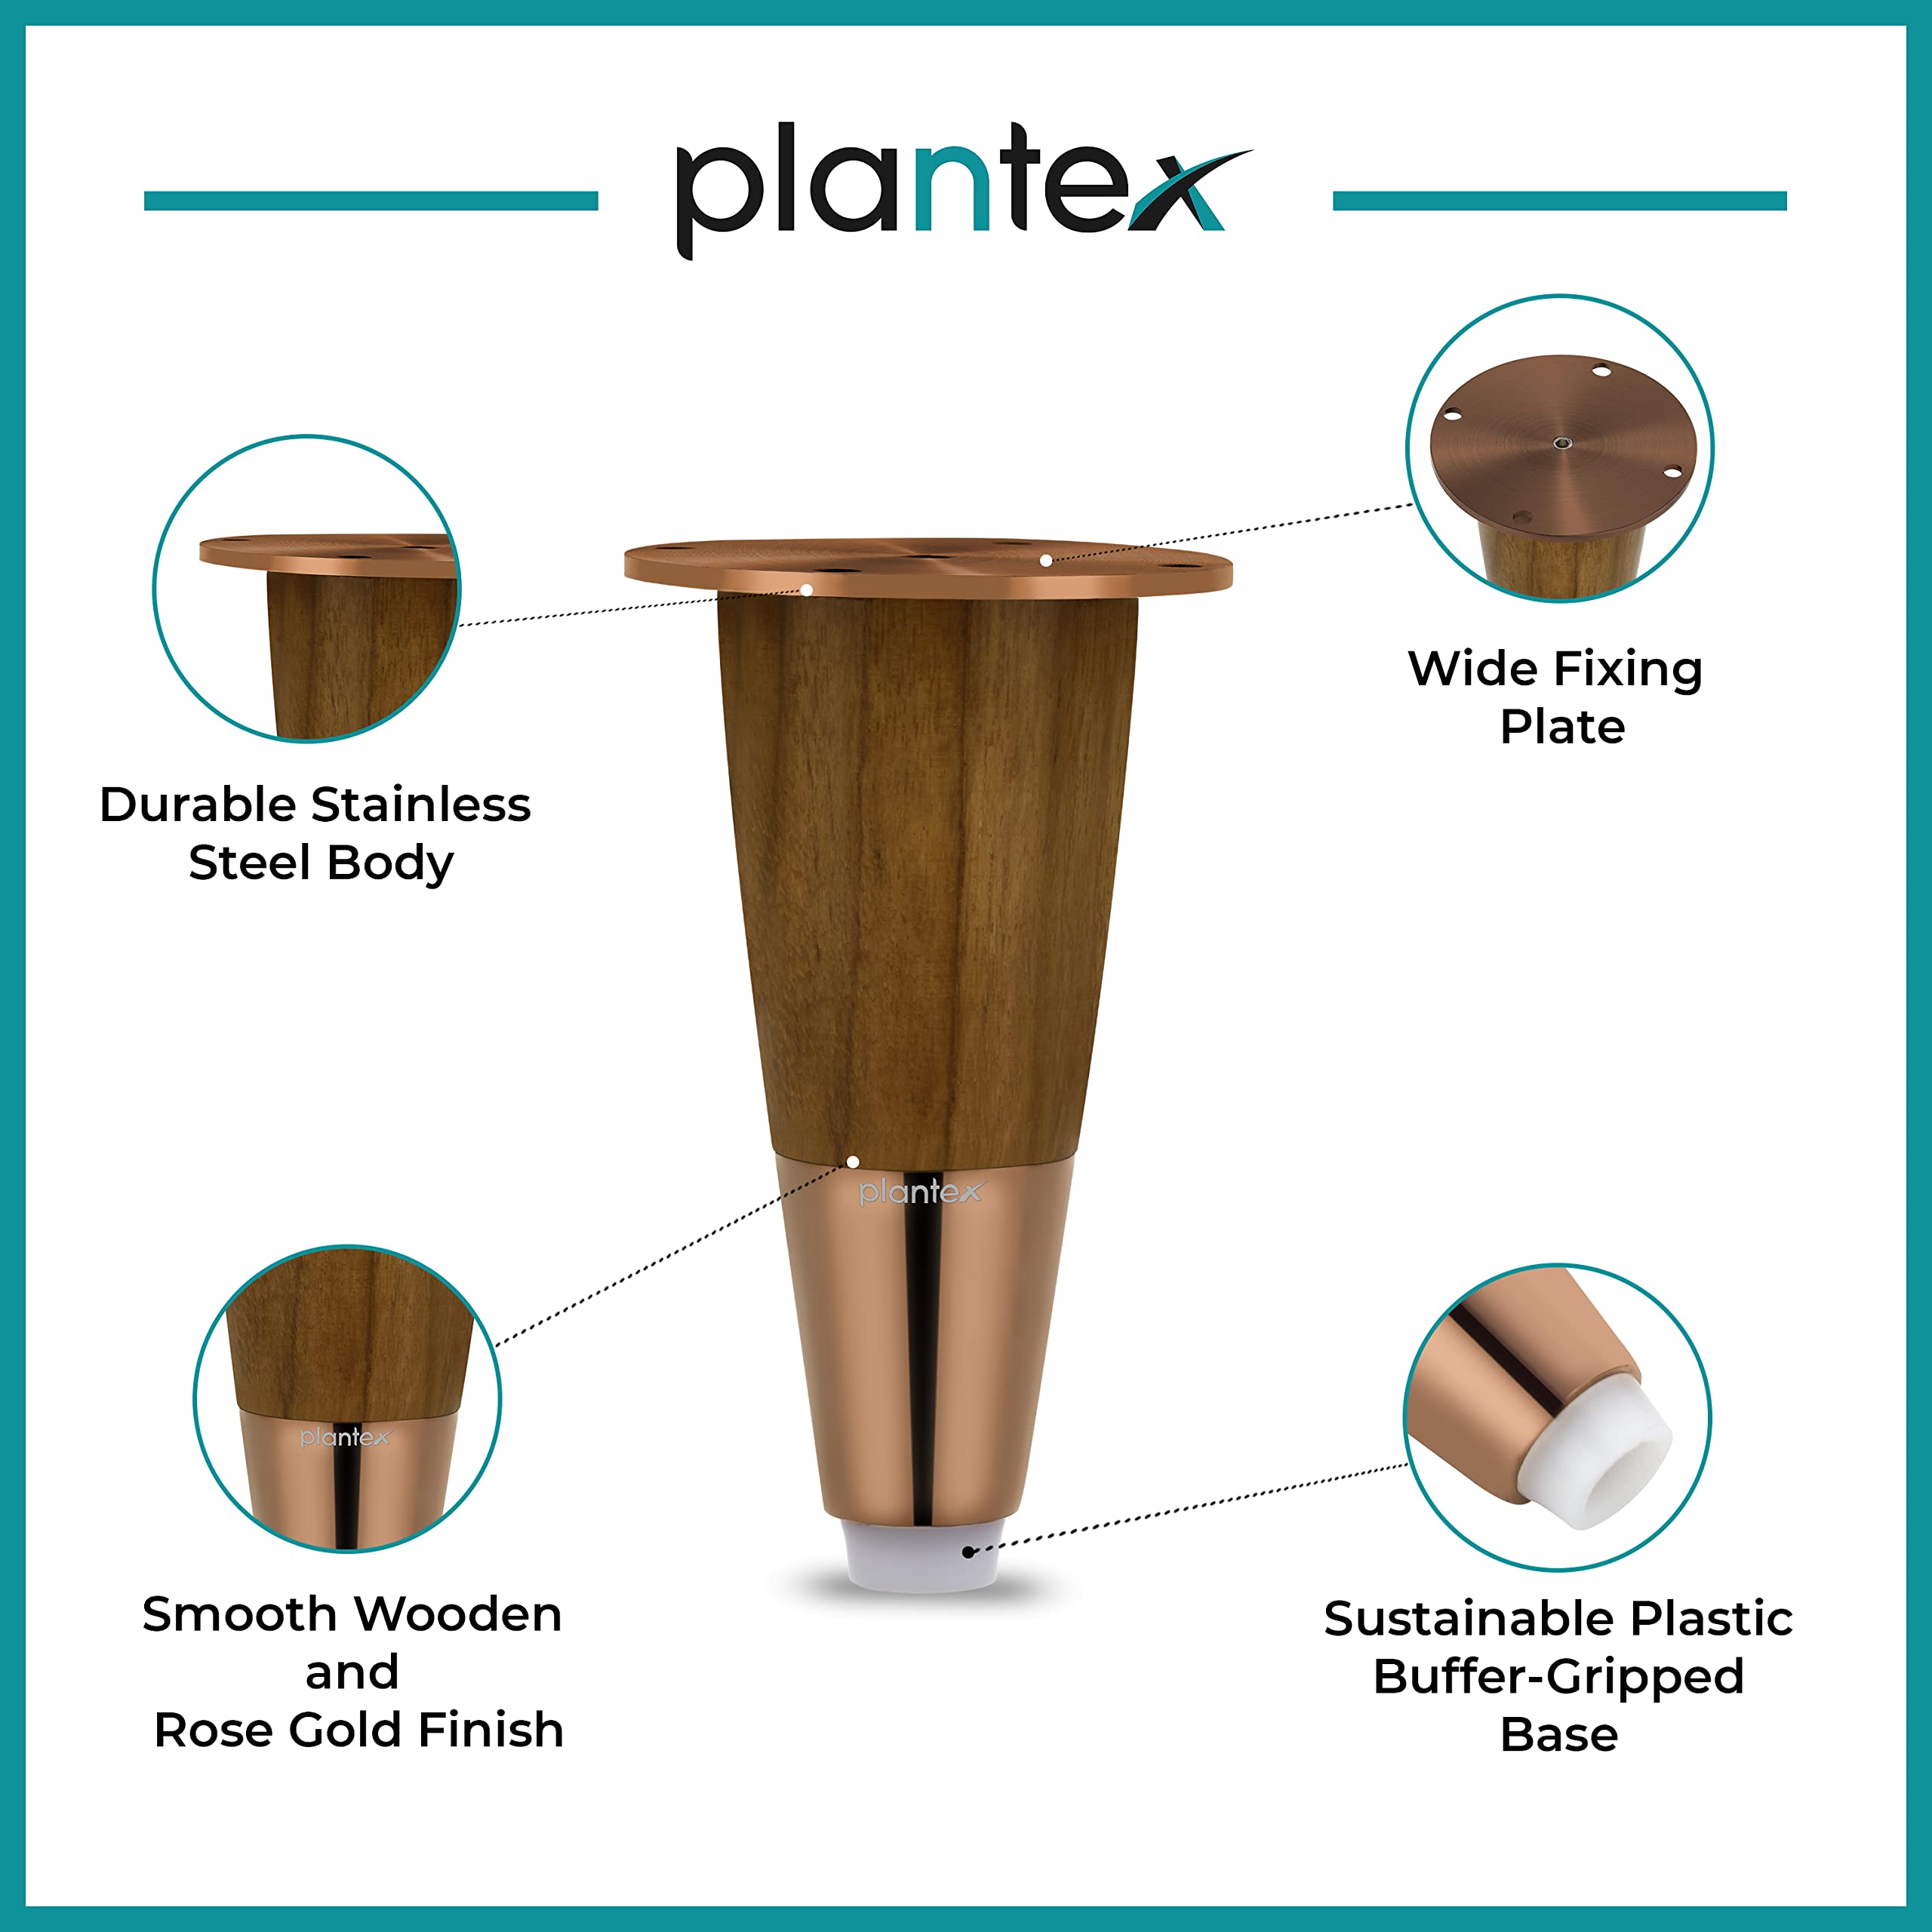 Plantex Stainless Steel and Wood 4 inch Sofa Leg/Bed Furniture Leg Pair for Home Furnitures (DTS-55-PVD Rose Gold) – 8 Pcs